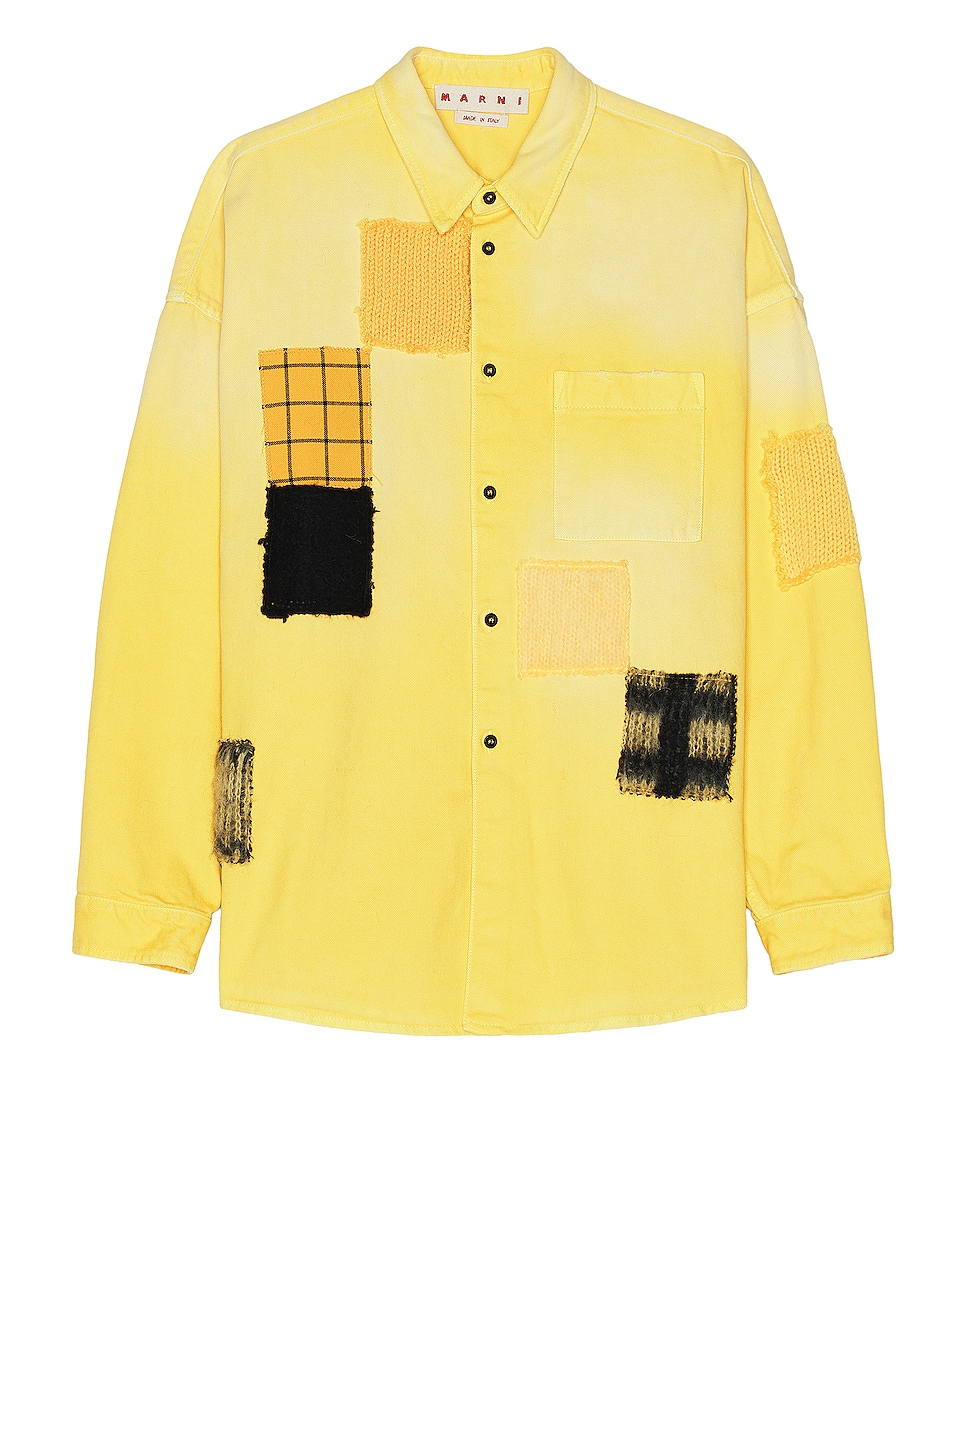 Image 1 of Marni Patchwork Shirt in Maize